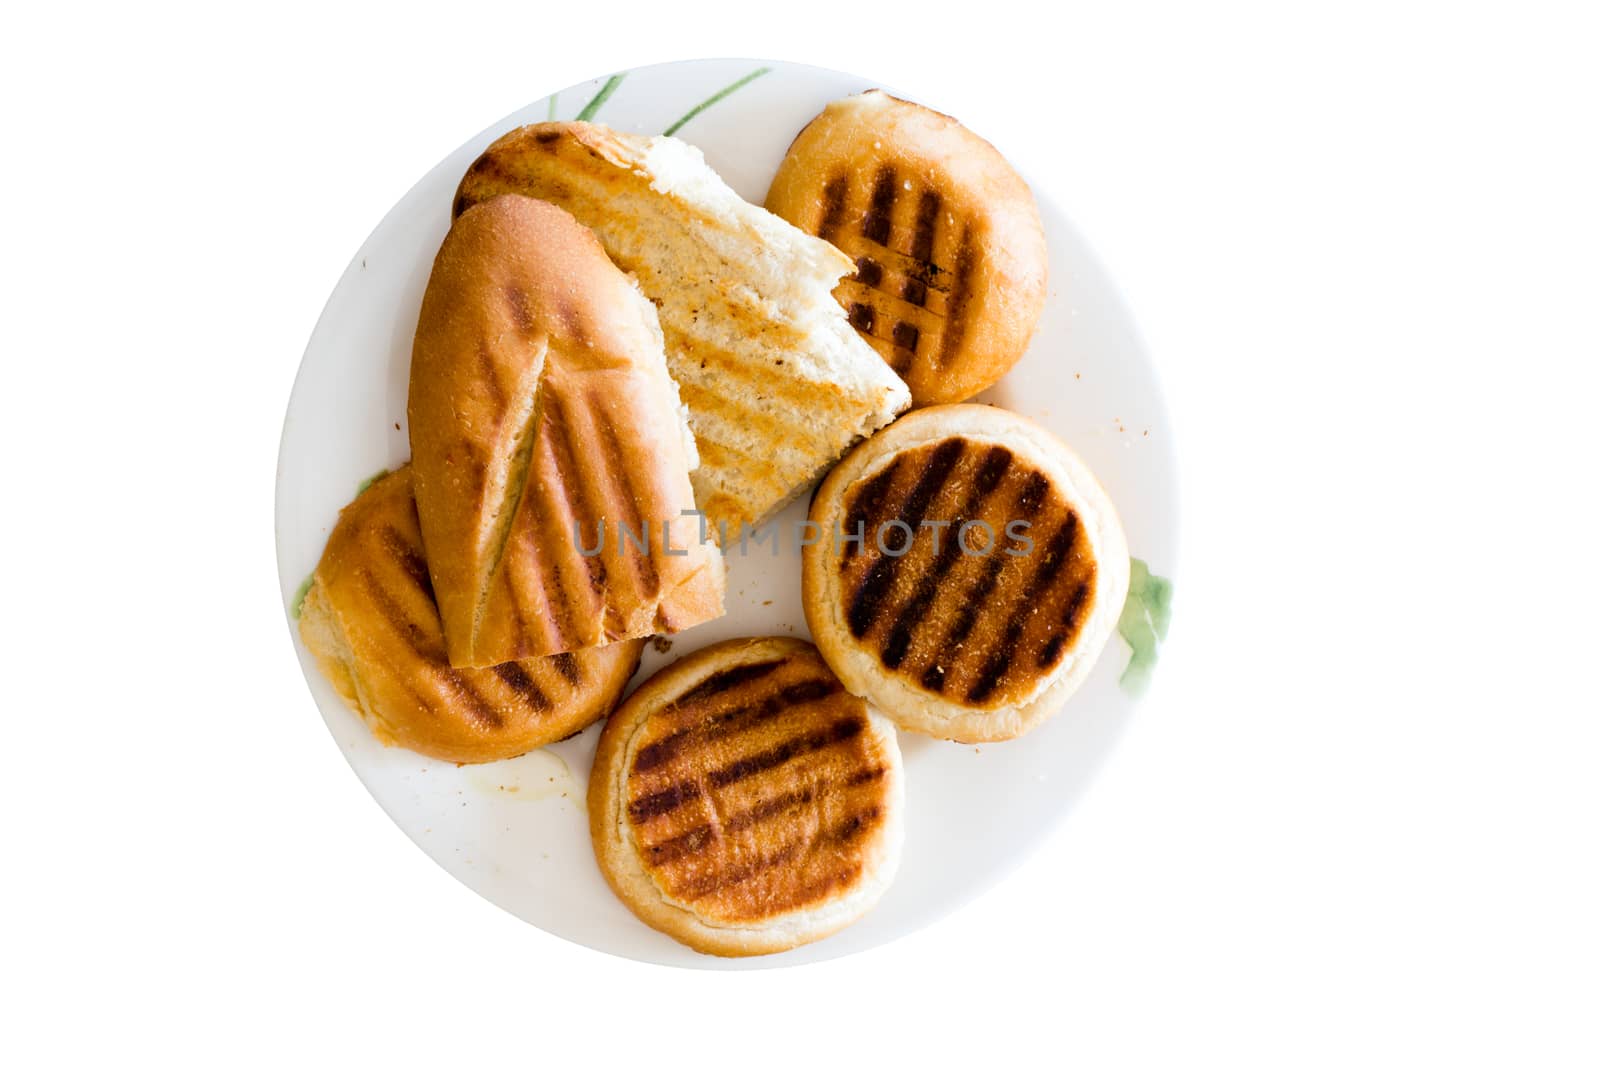 Plate of fresh crusty golden toasted buns and baguette to accompany a meal or serve as an appetizer viewed from above on a plate, isolated on white